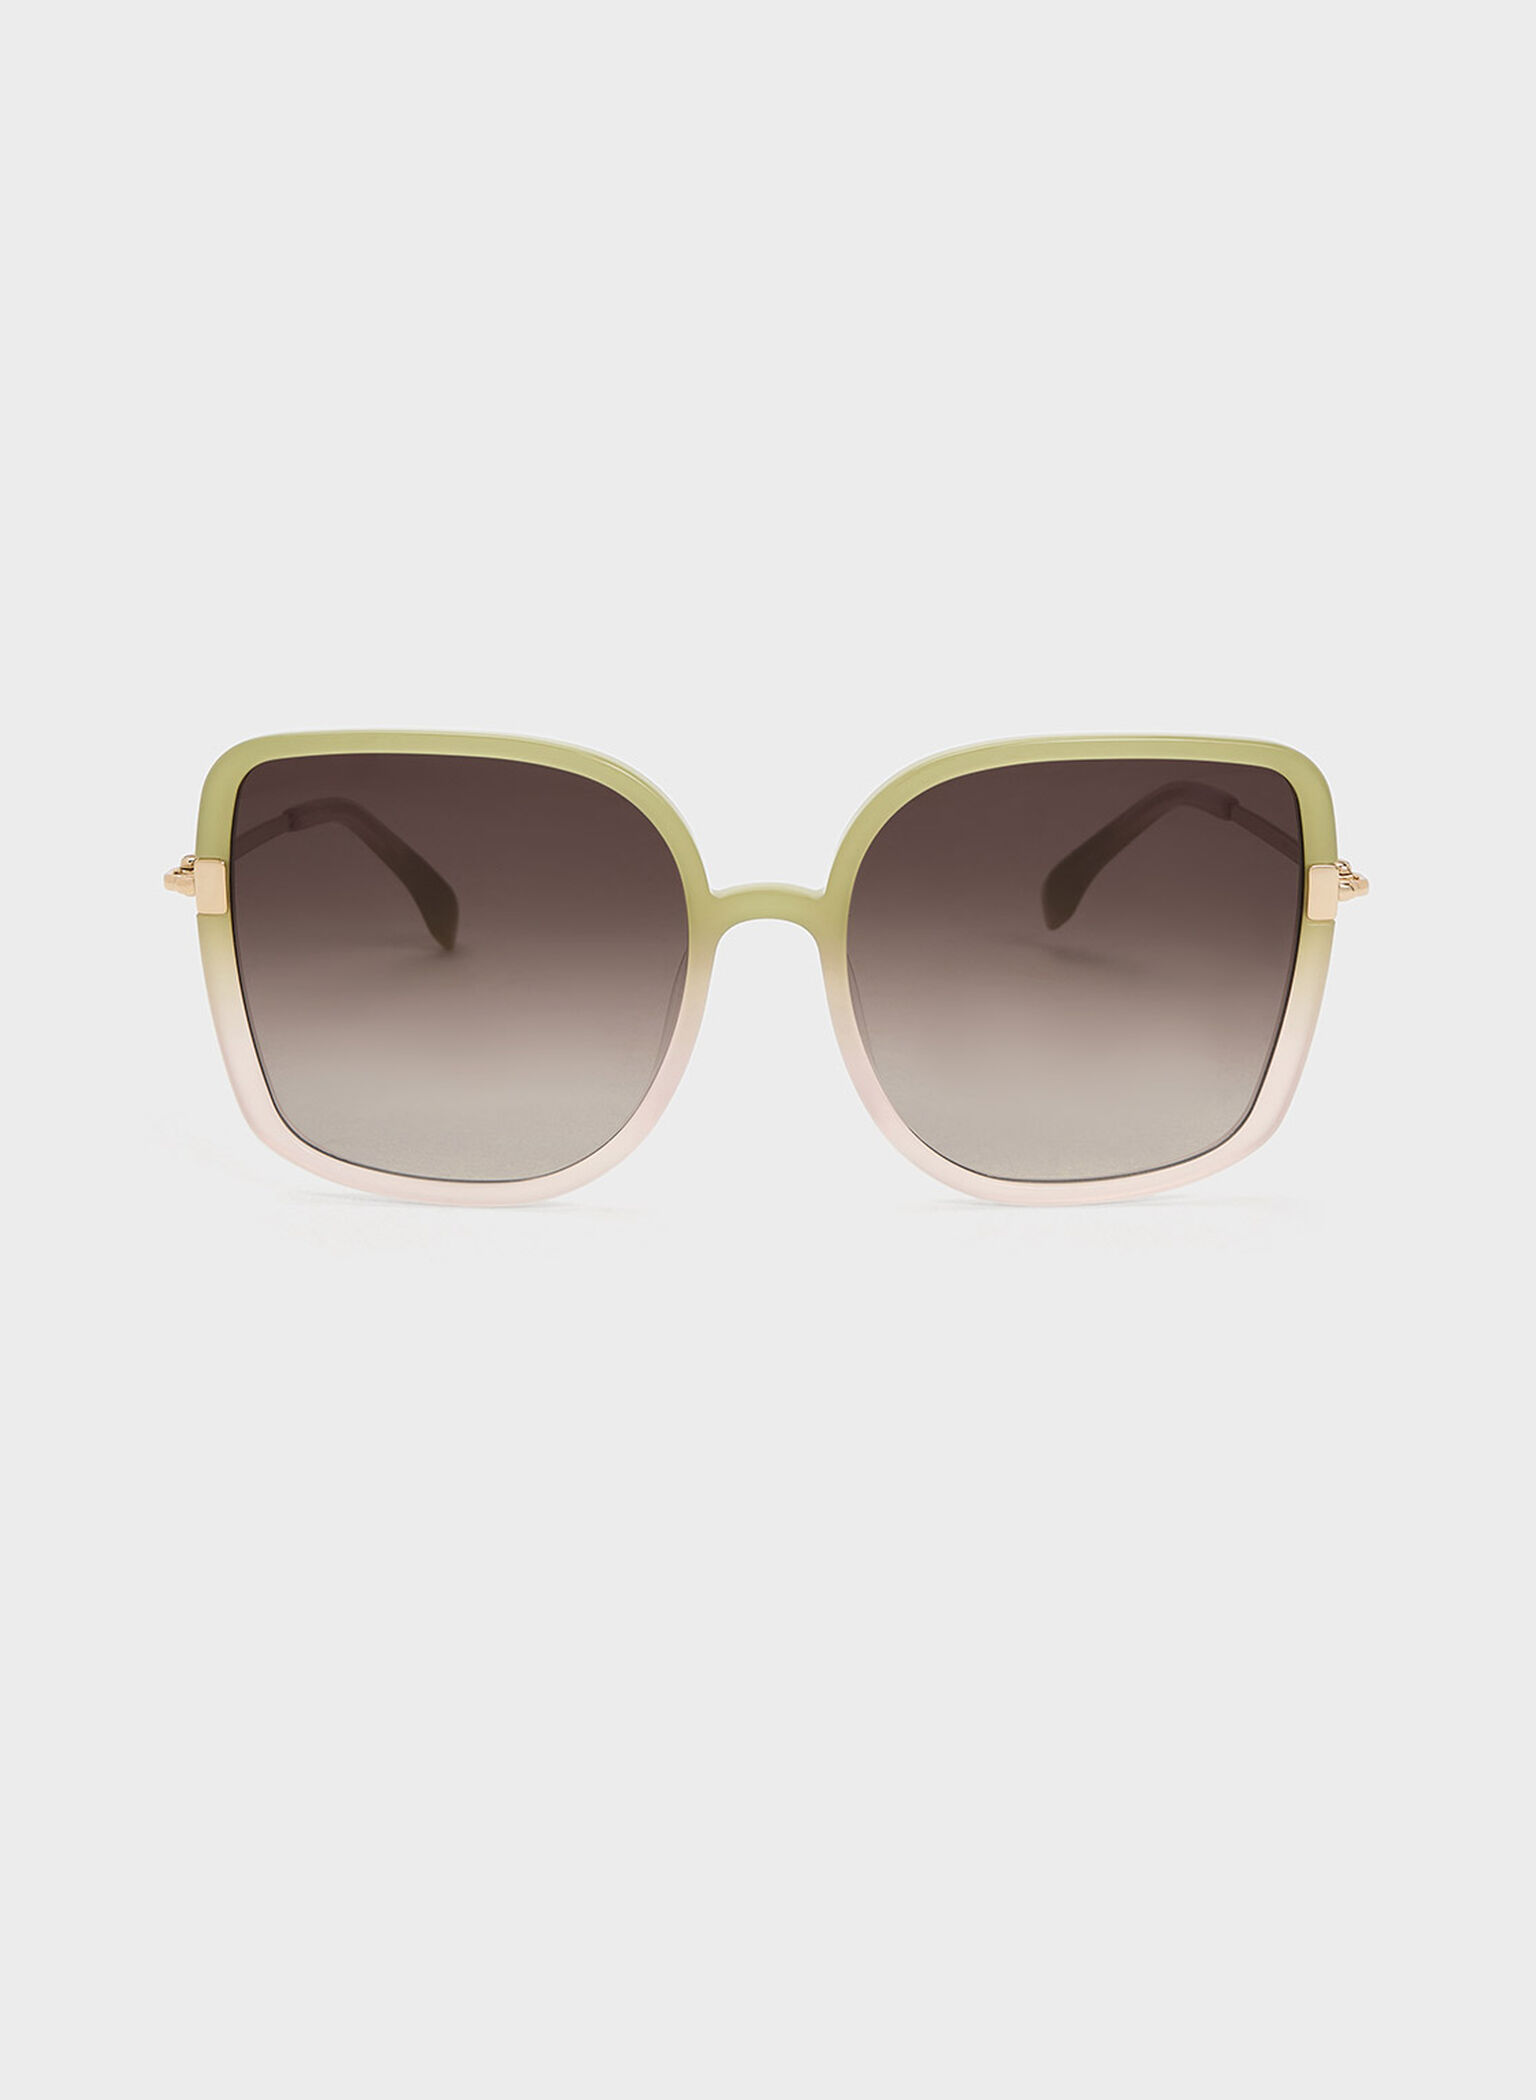 Oversized Square Chain-Link Sunglasses, Green, hi-res